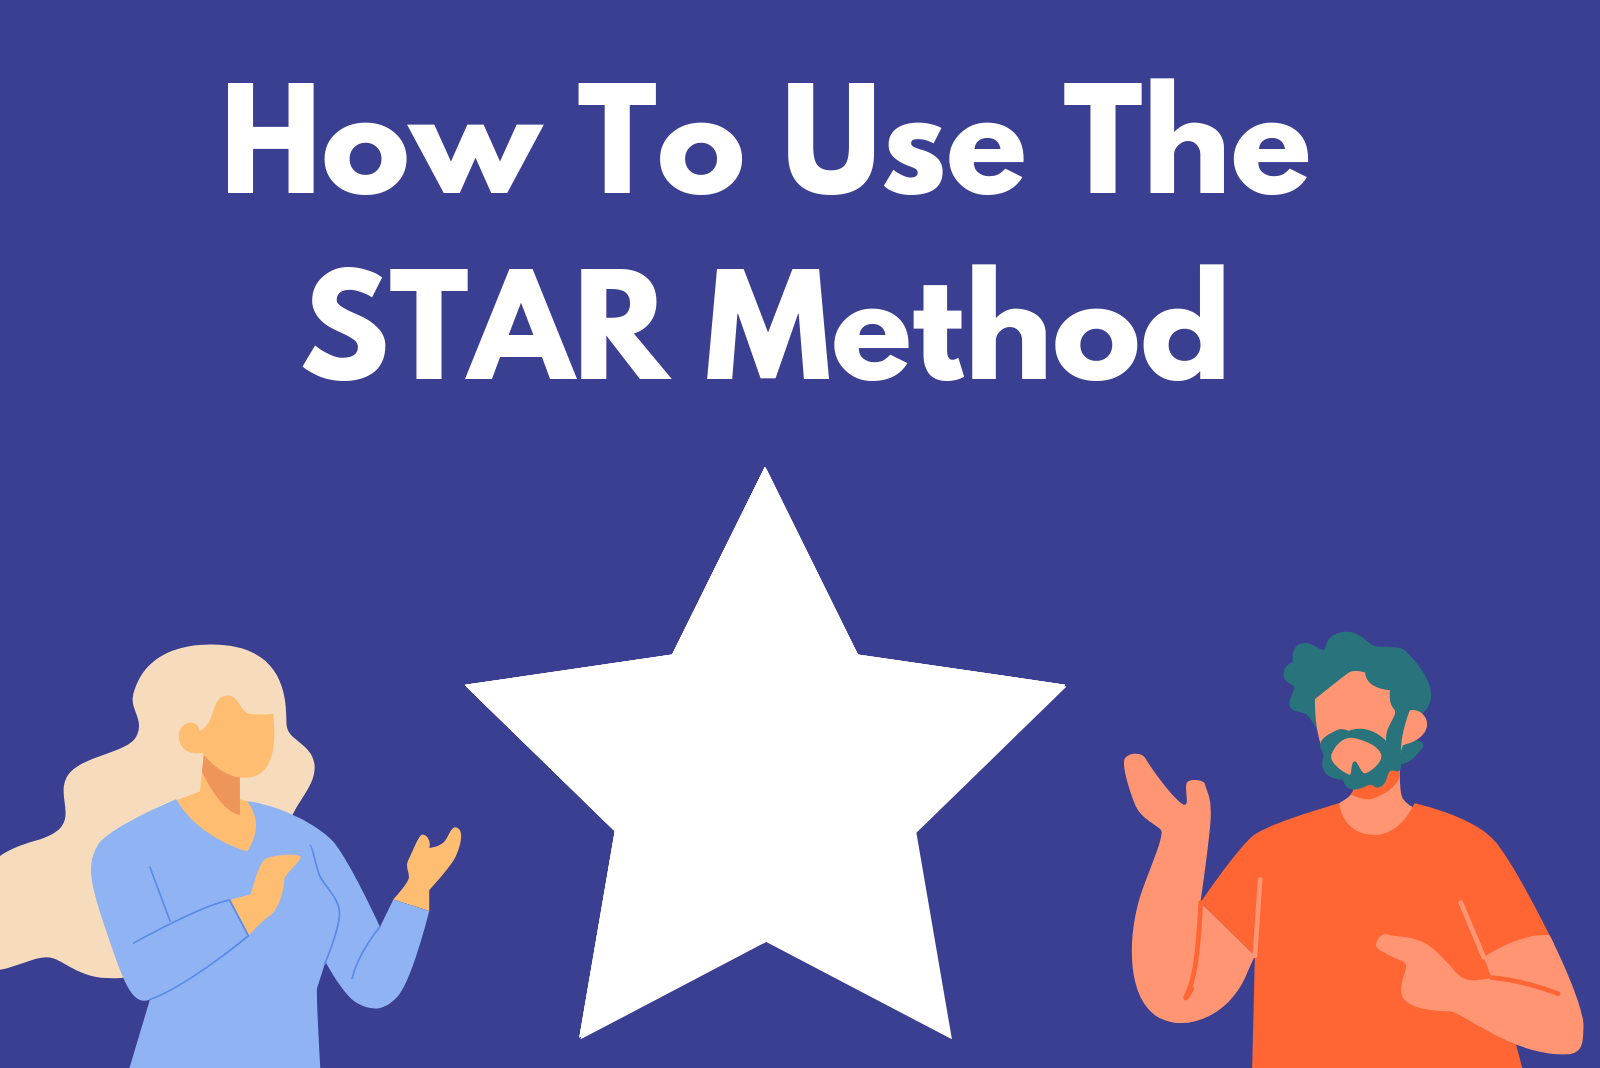 How to use the STAR method